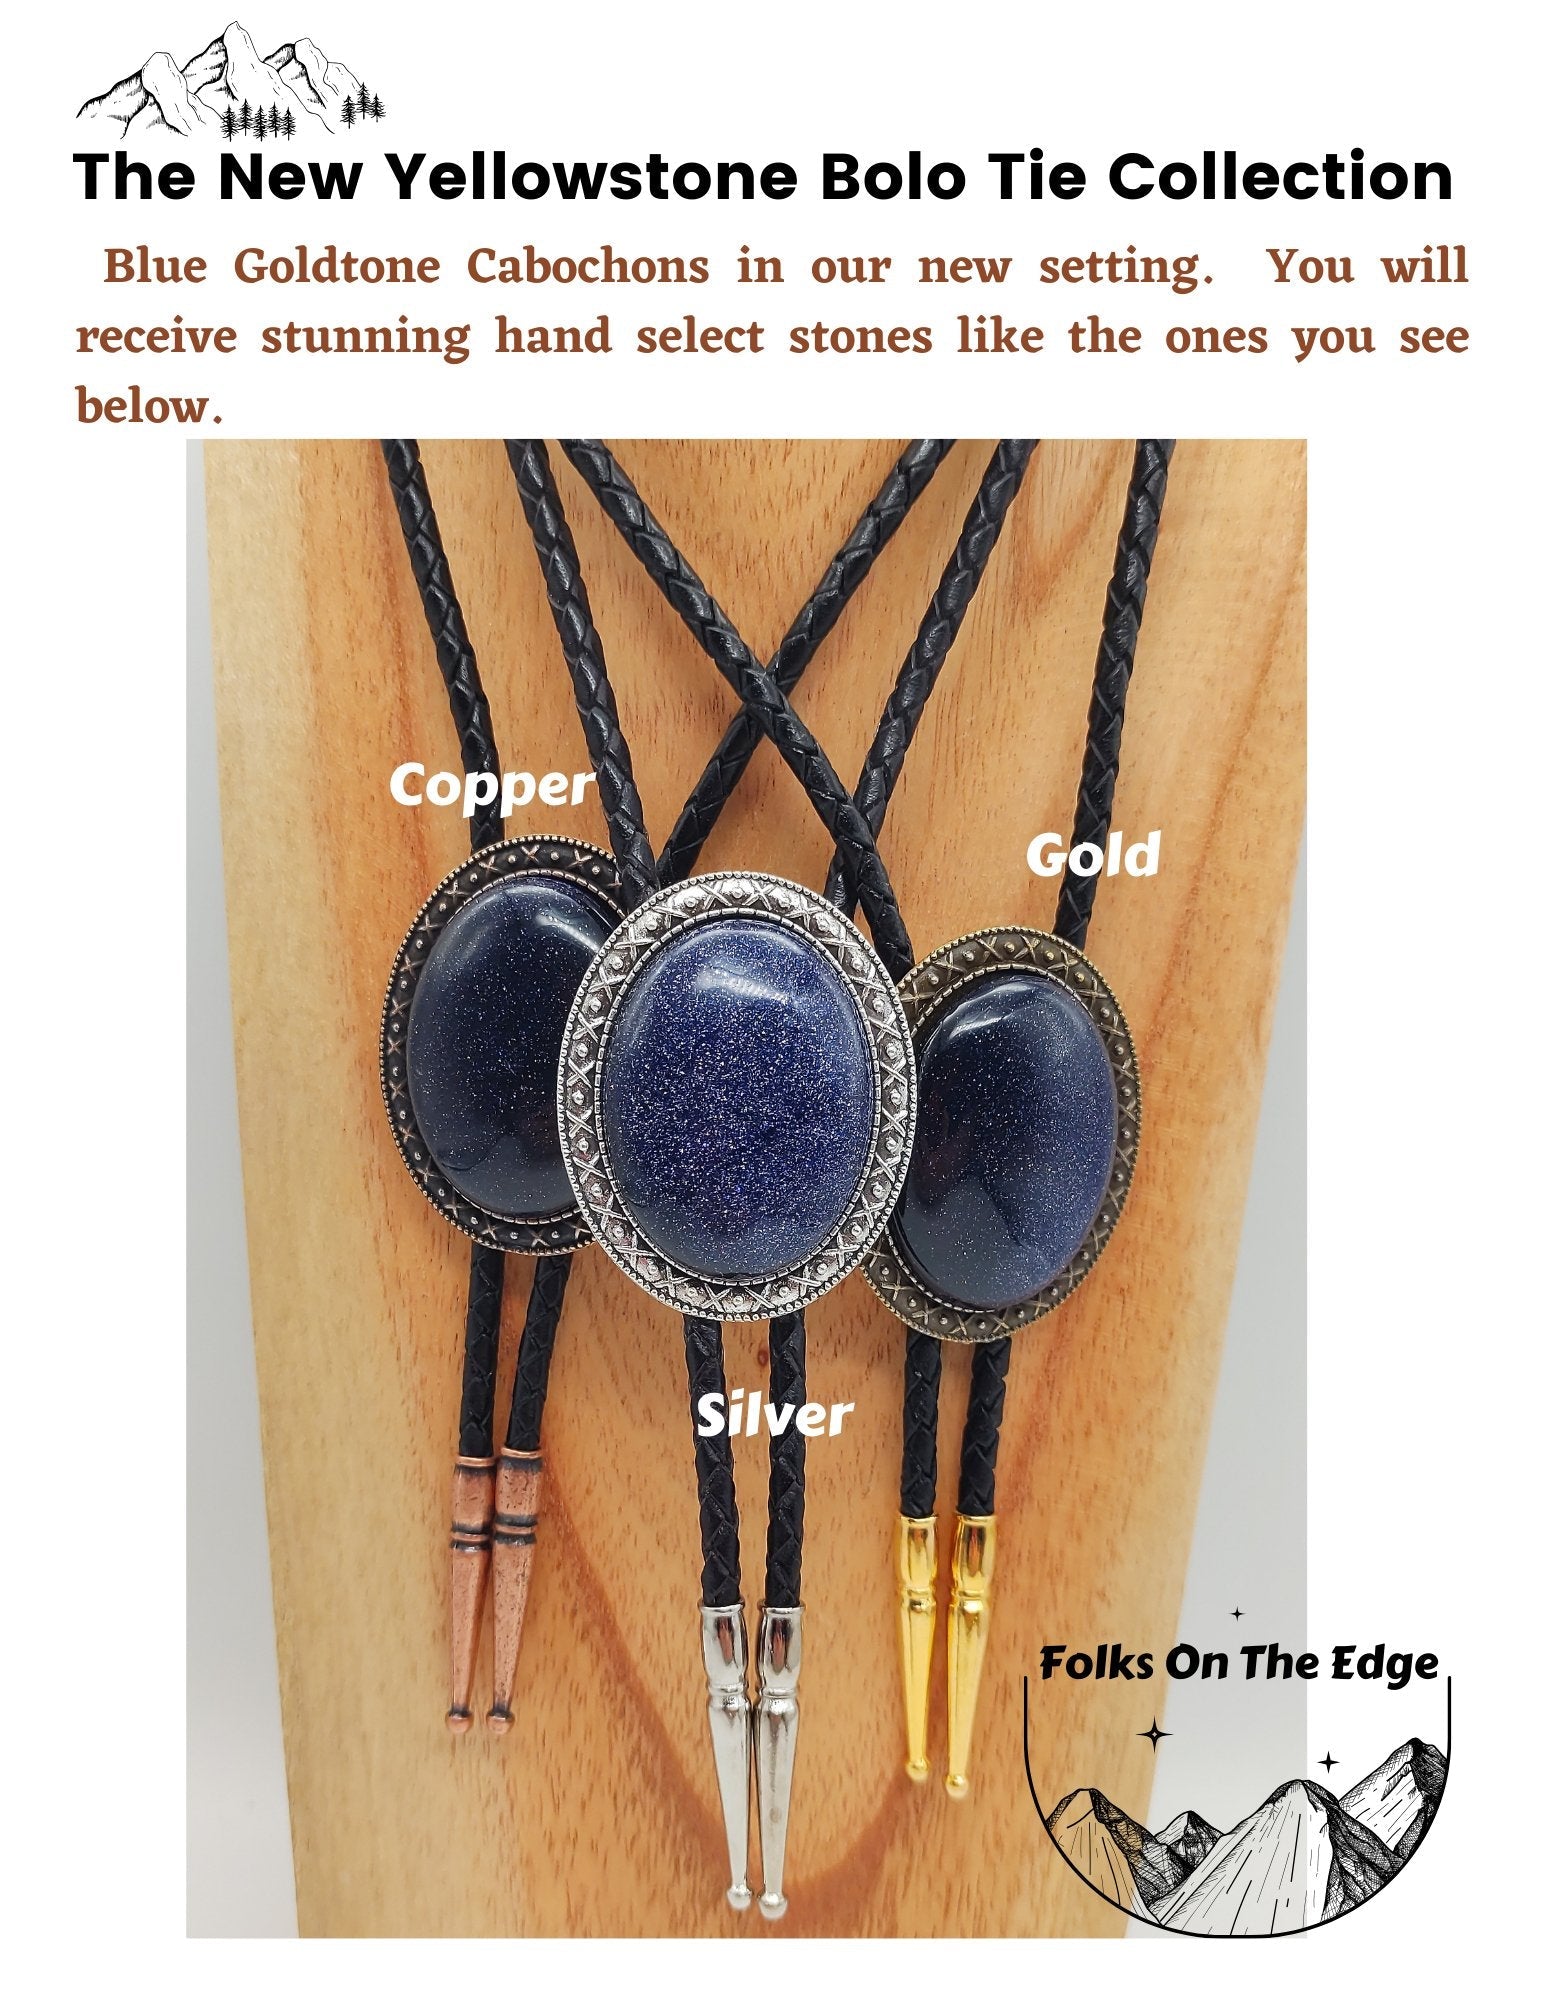 Yellowstone Bolo Tie with Blue Goldstone in Gold, Silver or Copper colors - Folks On The Edge